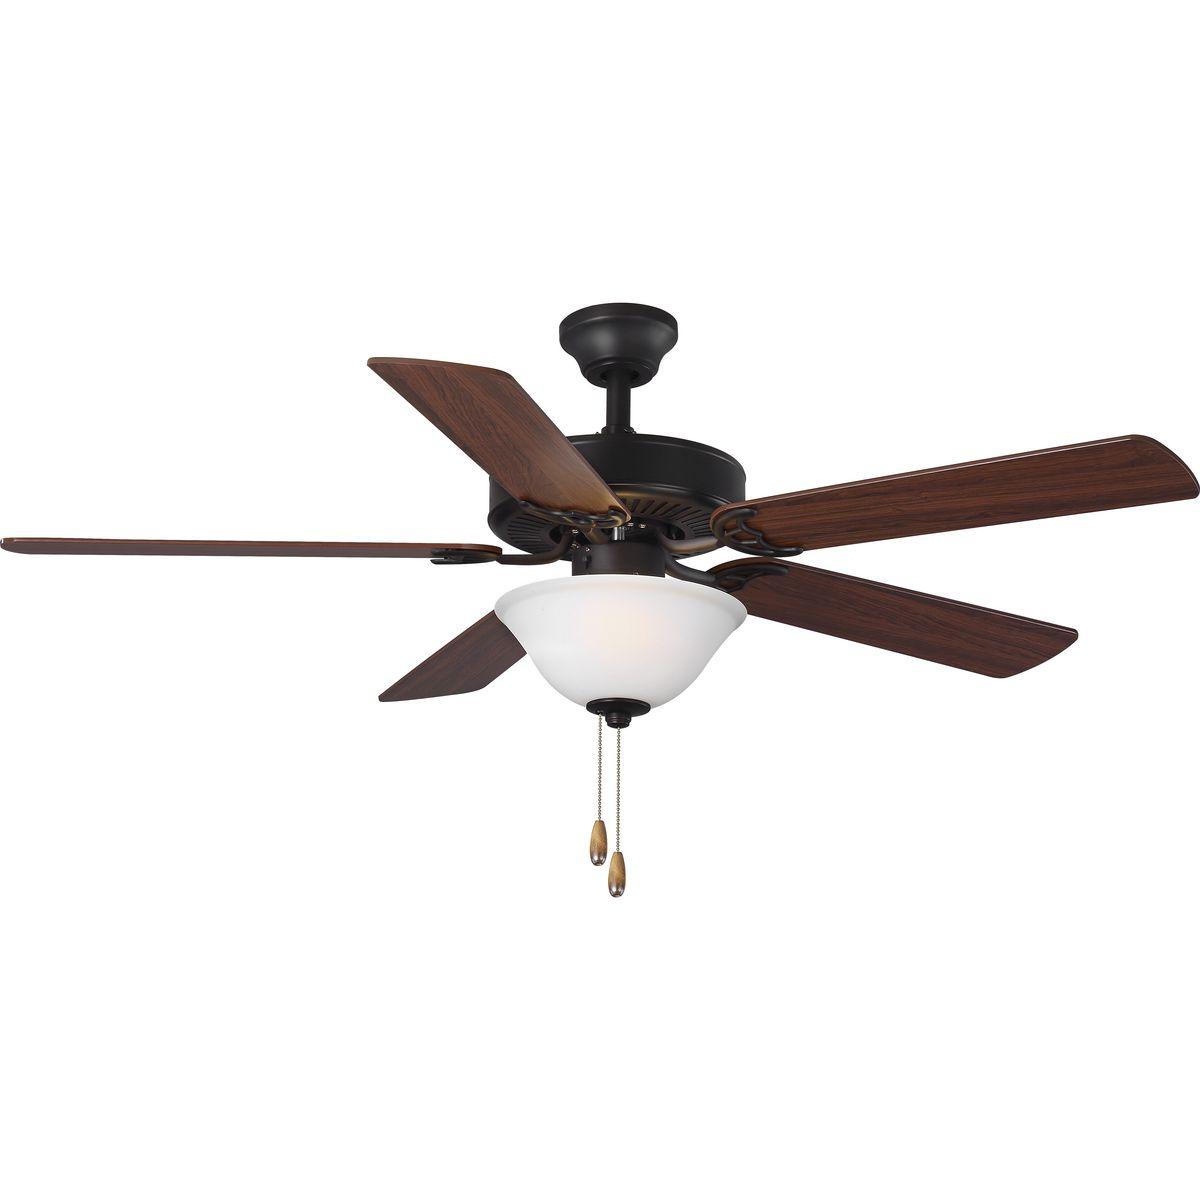 Hubbell P2599-129 A 52 in two-light, five-blade fan with reversible blades and a beautifully crafted white etched glass bowl. Powerful AirPro motor features 3-speed control that can also be reversed to provide year-round comfort. Two medium-based LED lamps are included (no